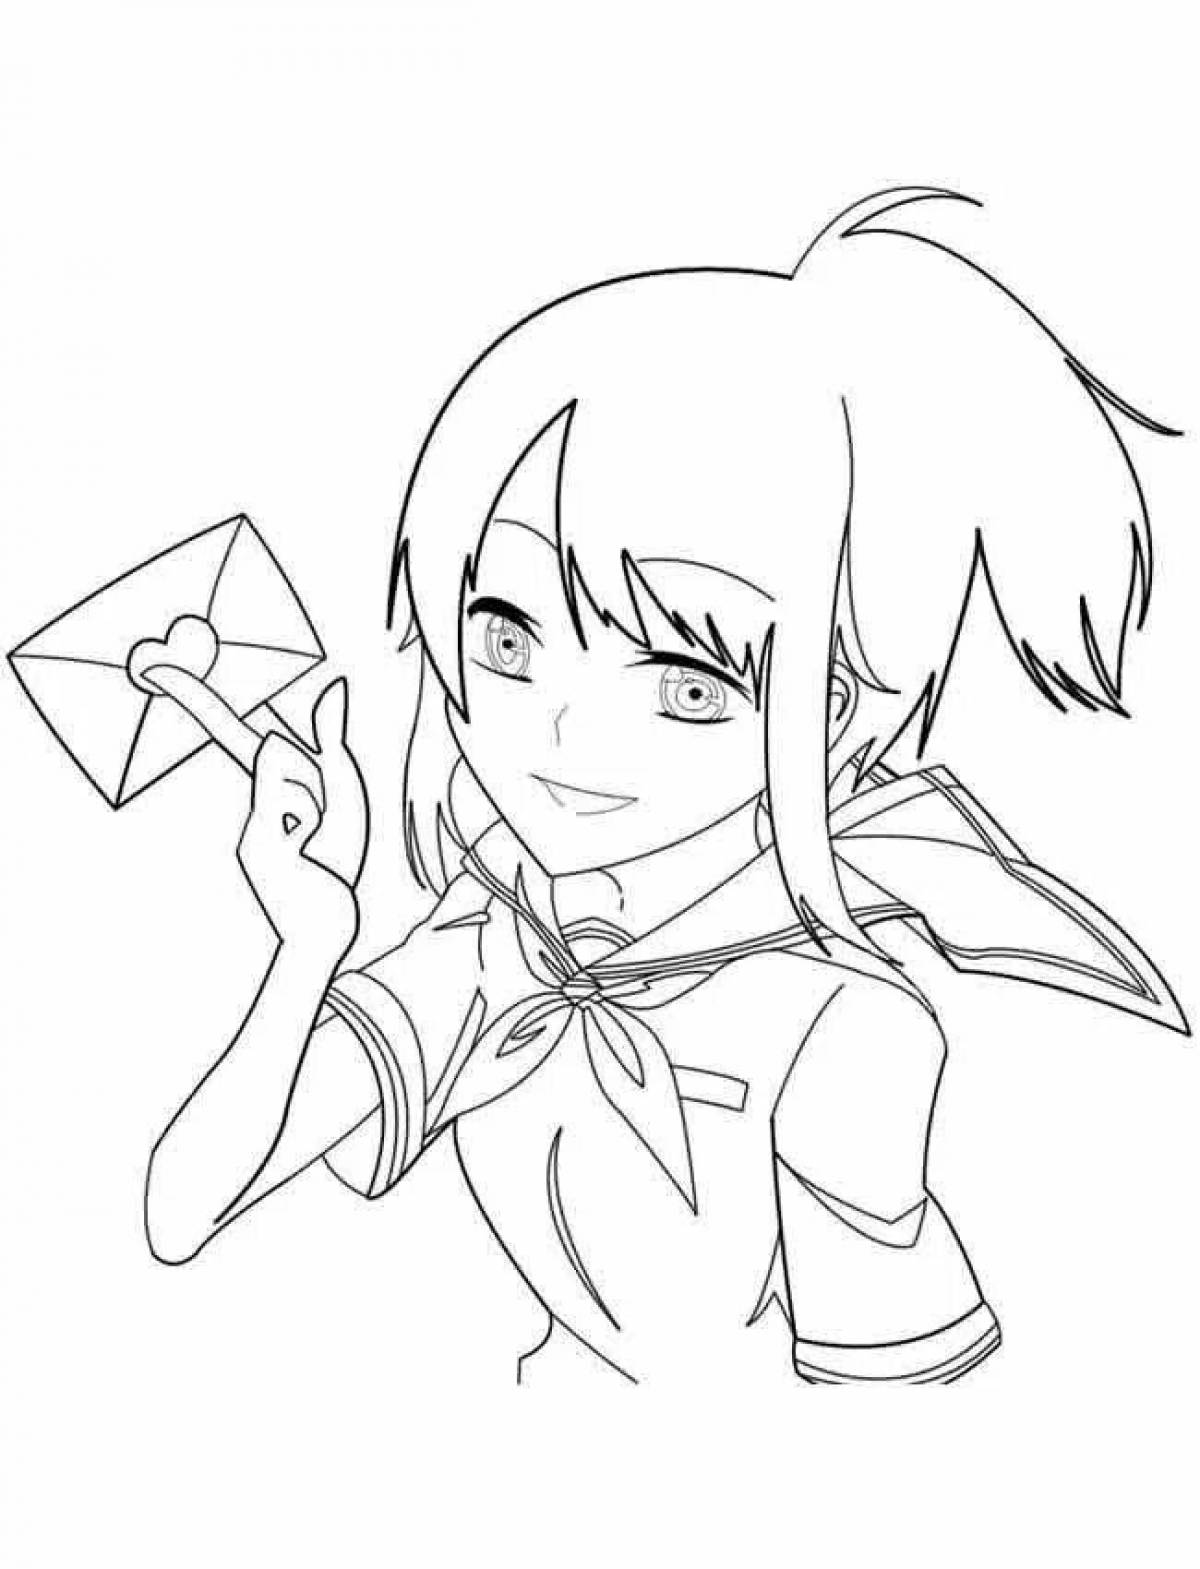 Yandere simulator coloring pages